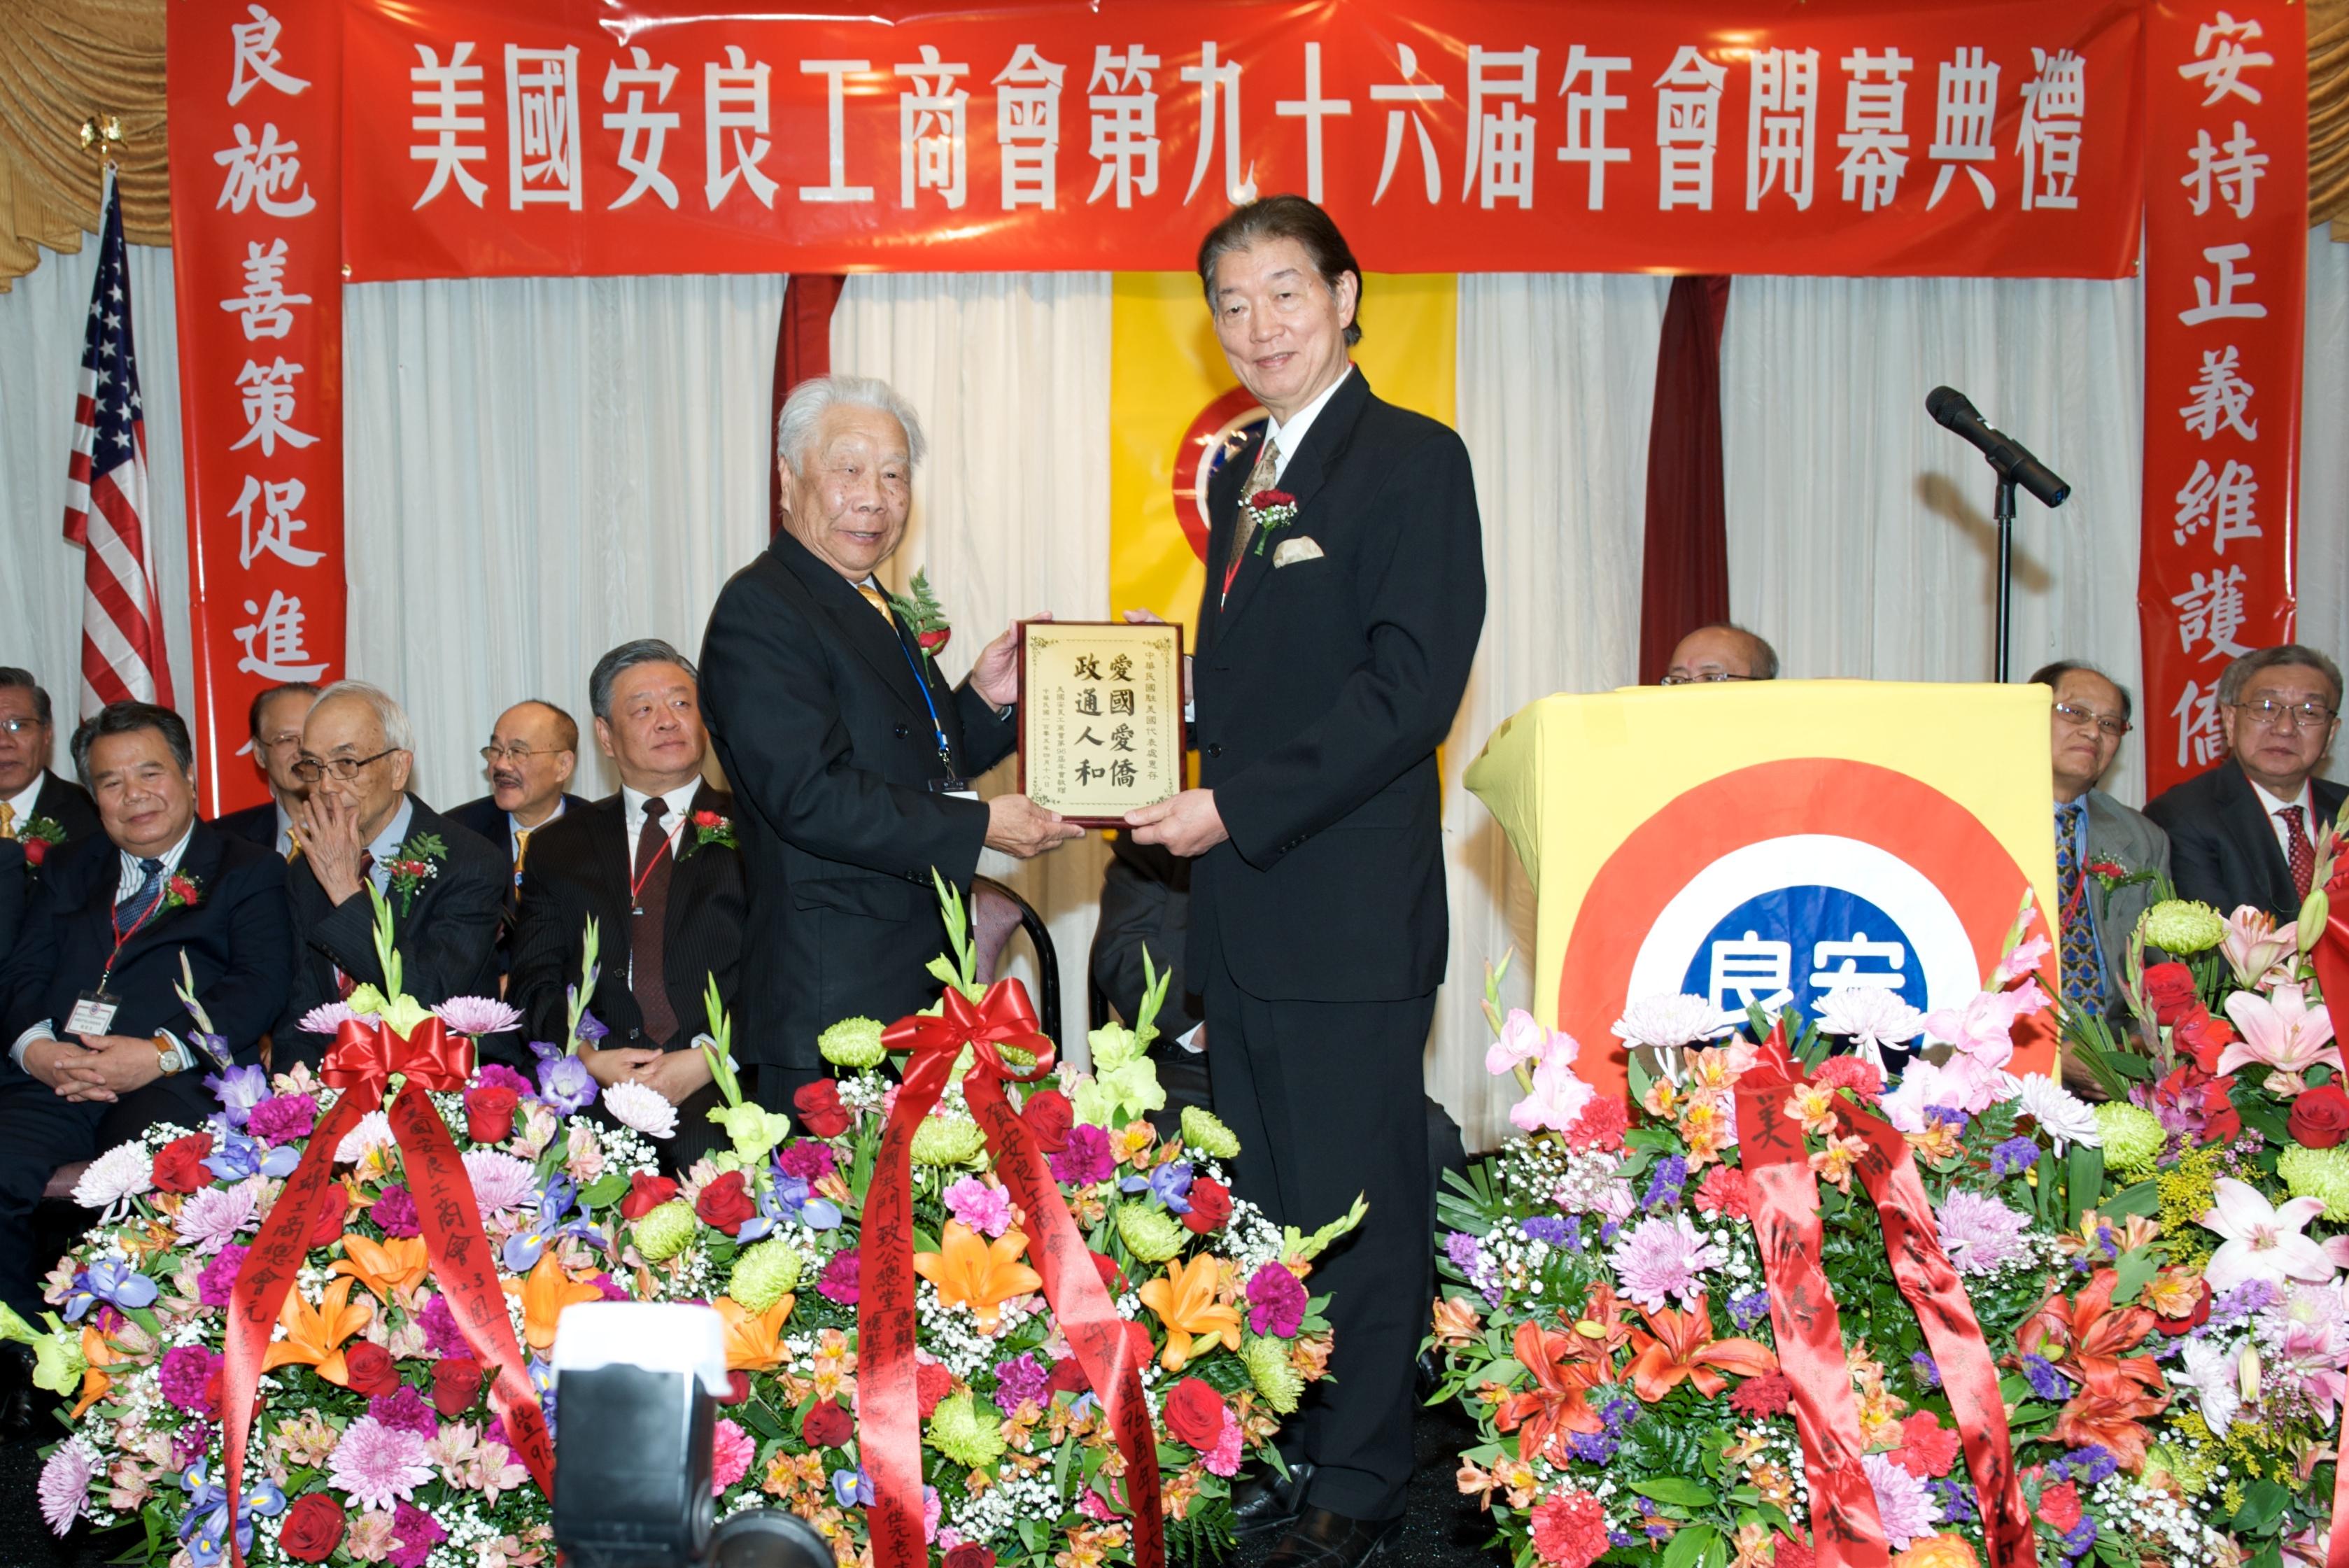 Chairman Kin S. Ng of the Chinese Merchants Association’s Honorary Elder Committee presented a plaque of appreciation to Representative Shen during the ceremony.